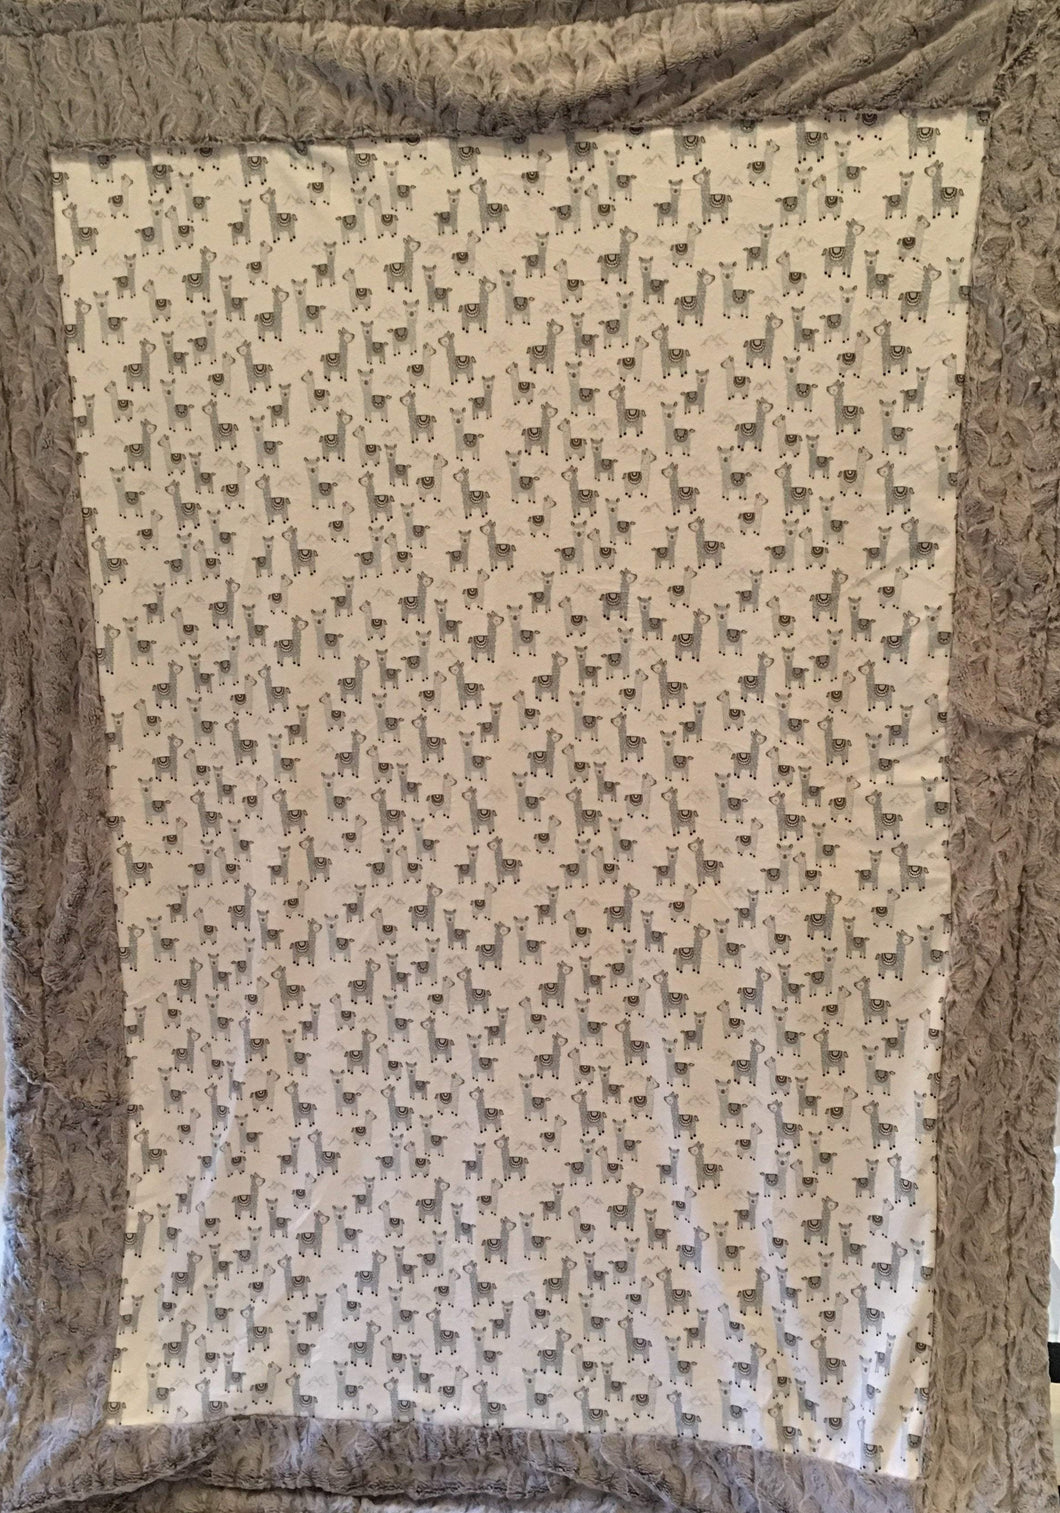 Bordered Style Blanket: Alpacas in Stone Bordered and Backed Throw on Bella Tip Dyed in Silver